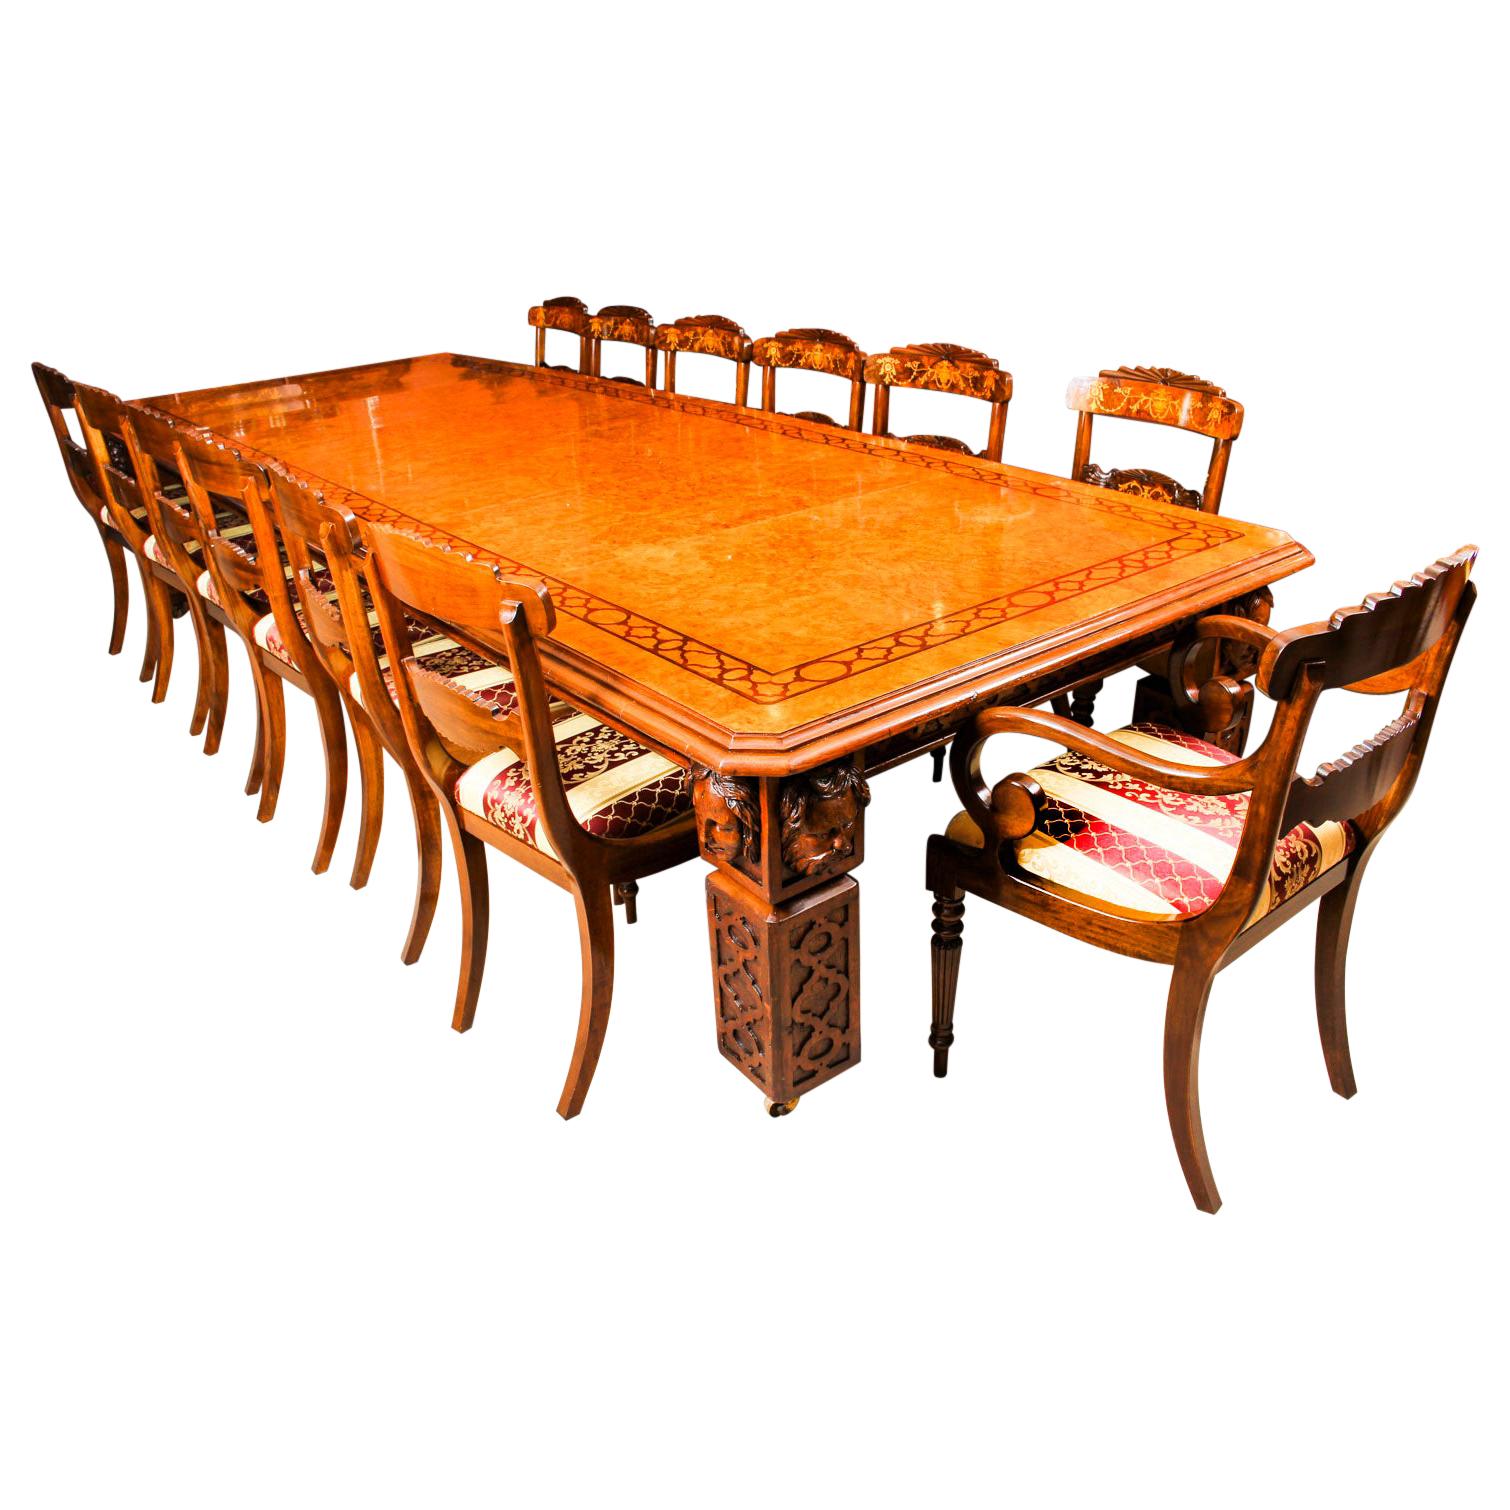 Antique Elizabethan Revival Pollard Oak Dining Table 19th Century and 14 Chairs For Sale